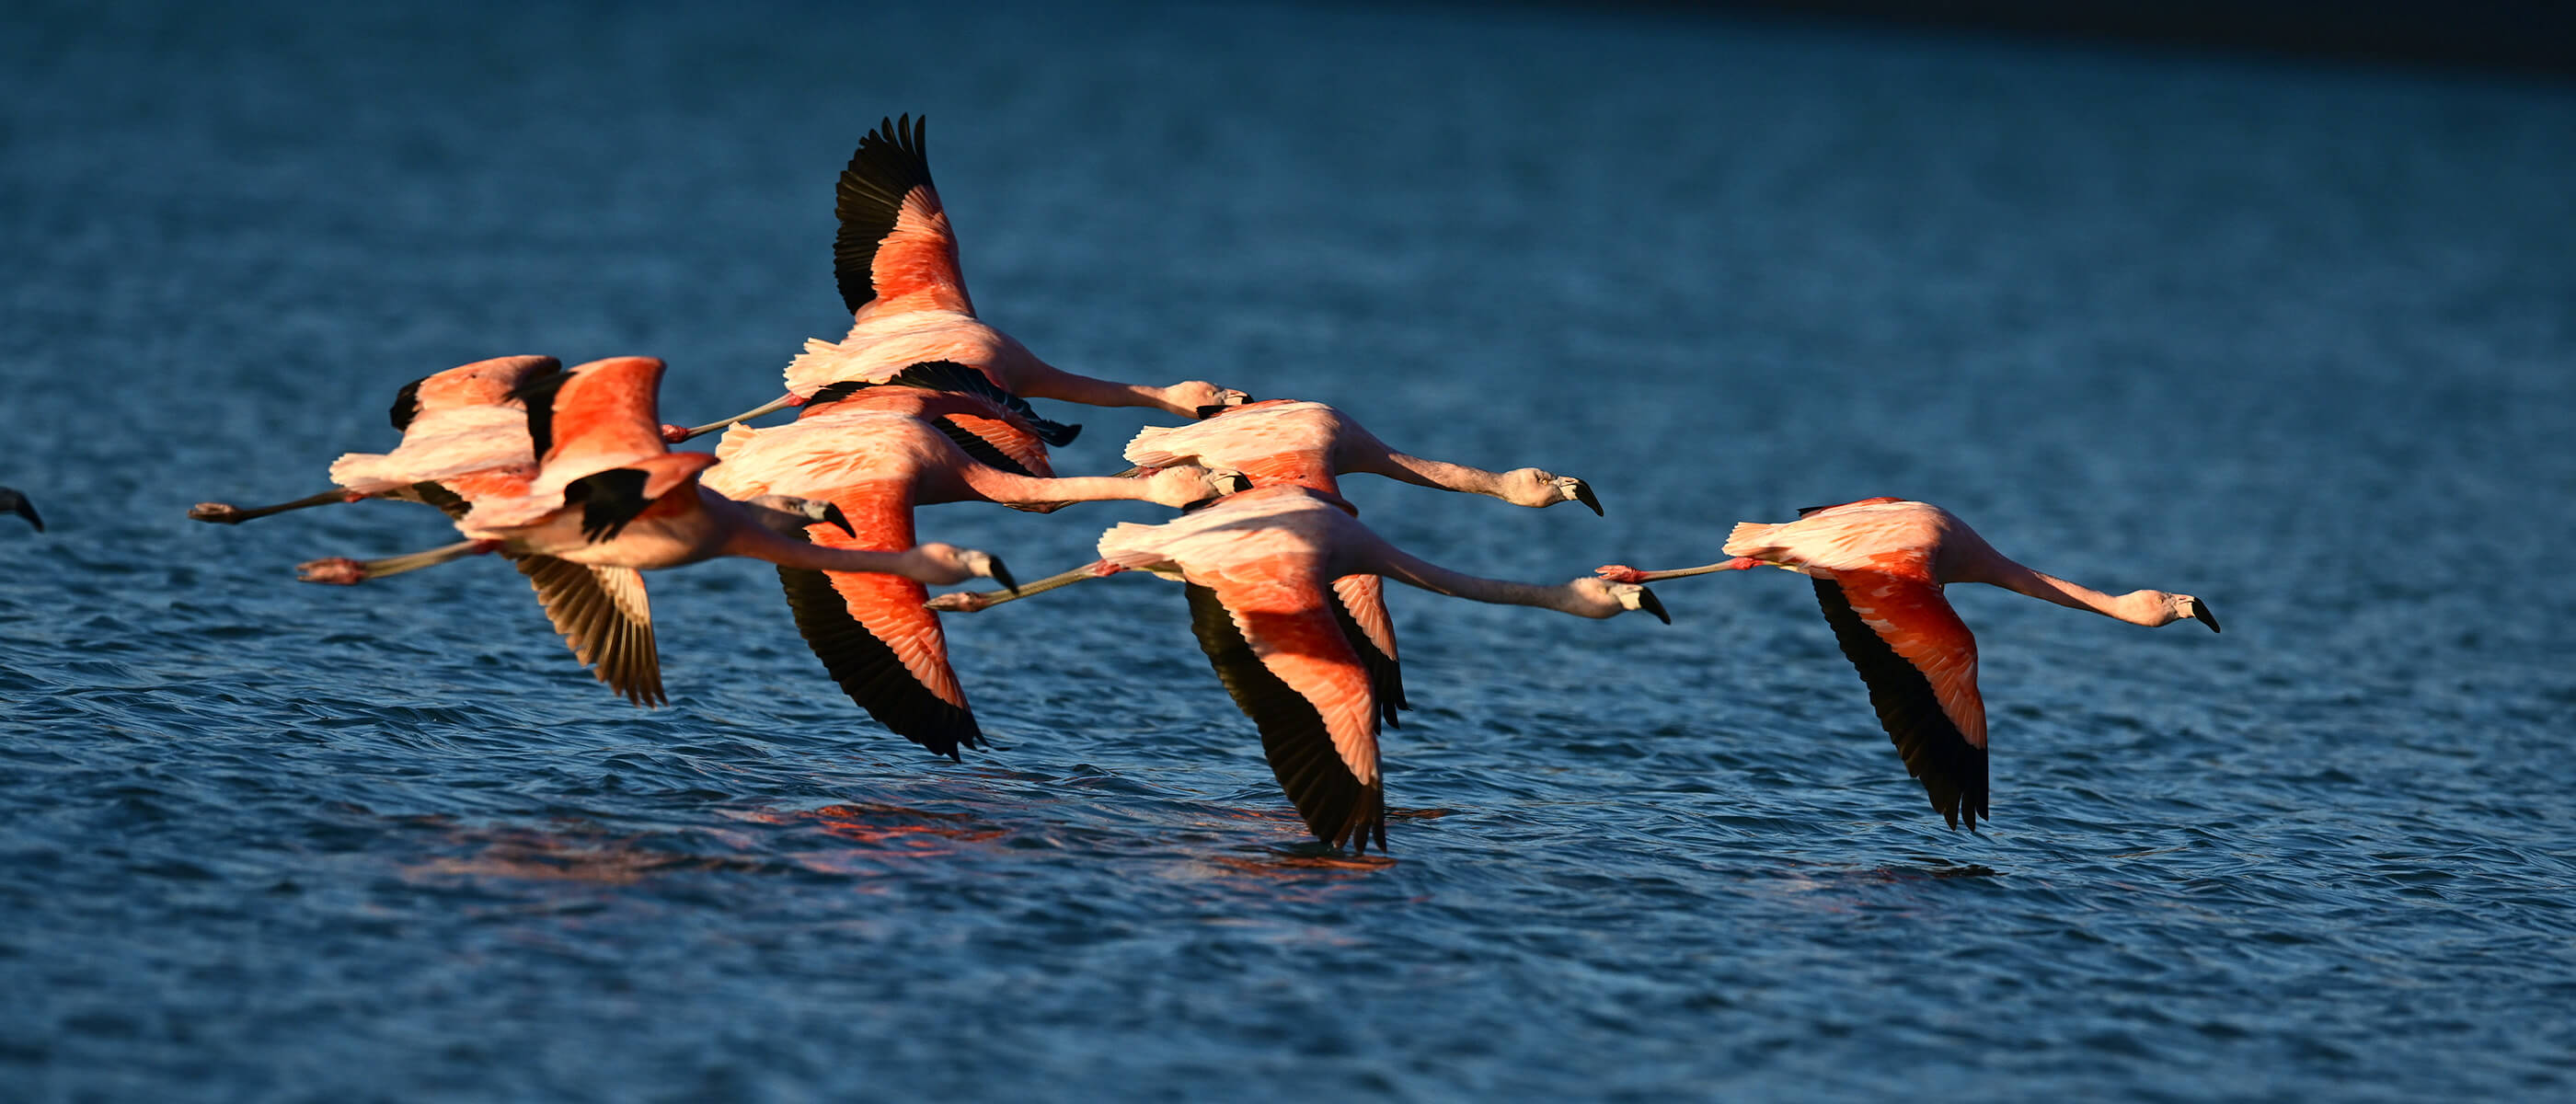 photo of flamingoes in flight over water